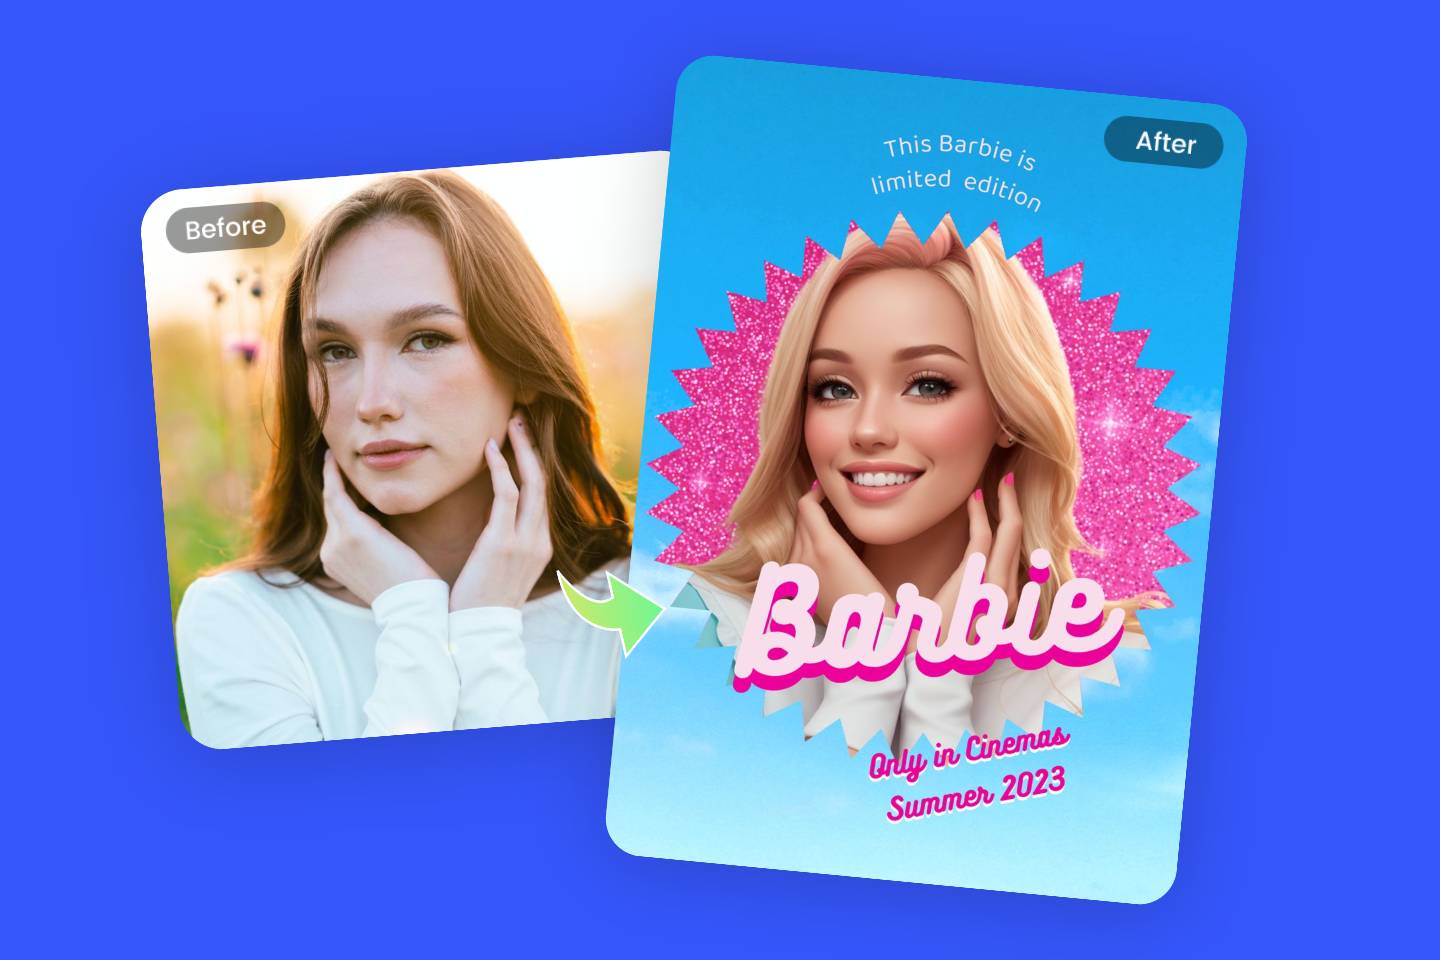 Make your own barbie poster and meme easily with Fotor's free online Barbie selfie generator